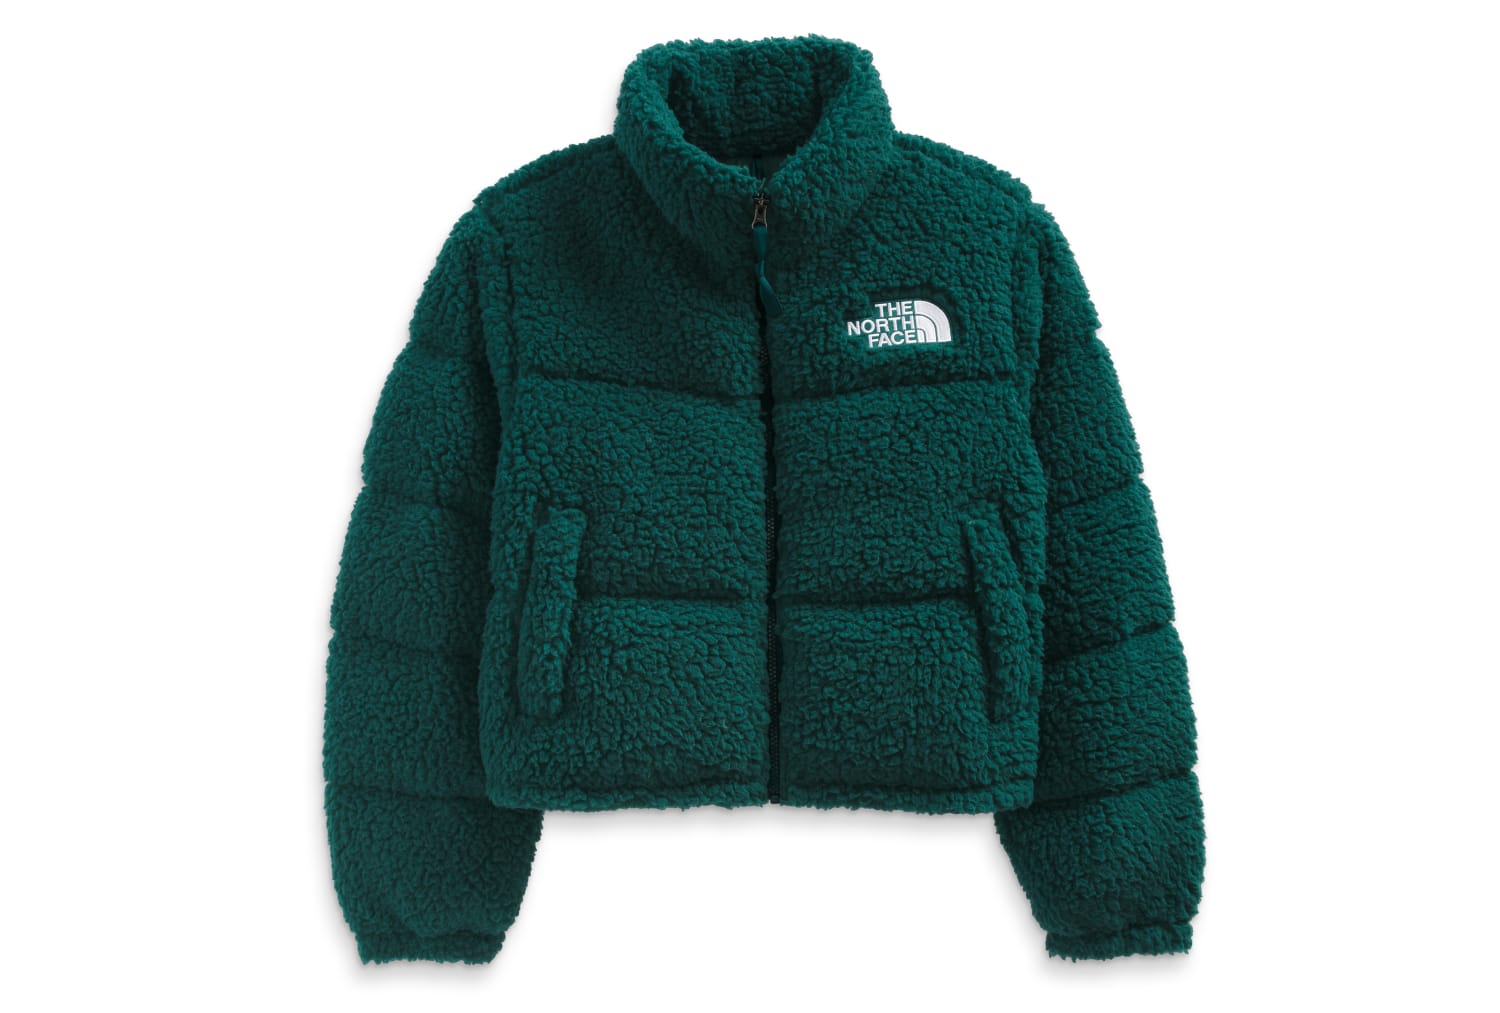 To kill Give Excerpt The North Face is renaming its fleece jackets and spotlighting the Sherpa  people